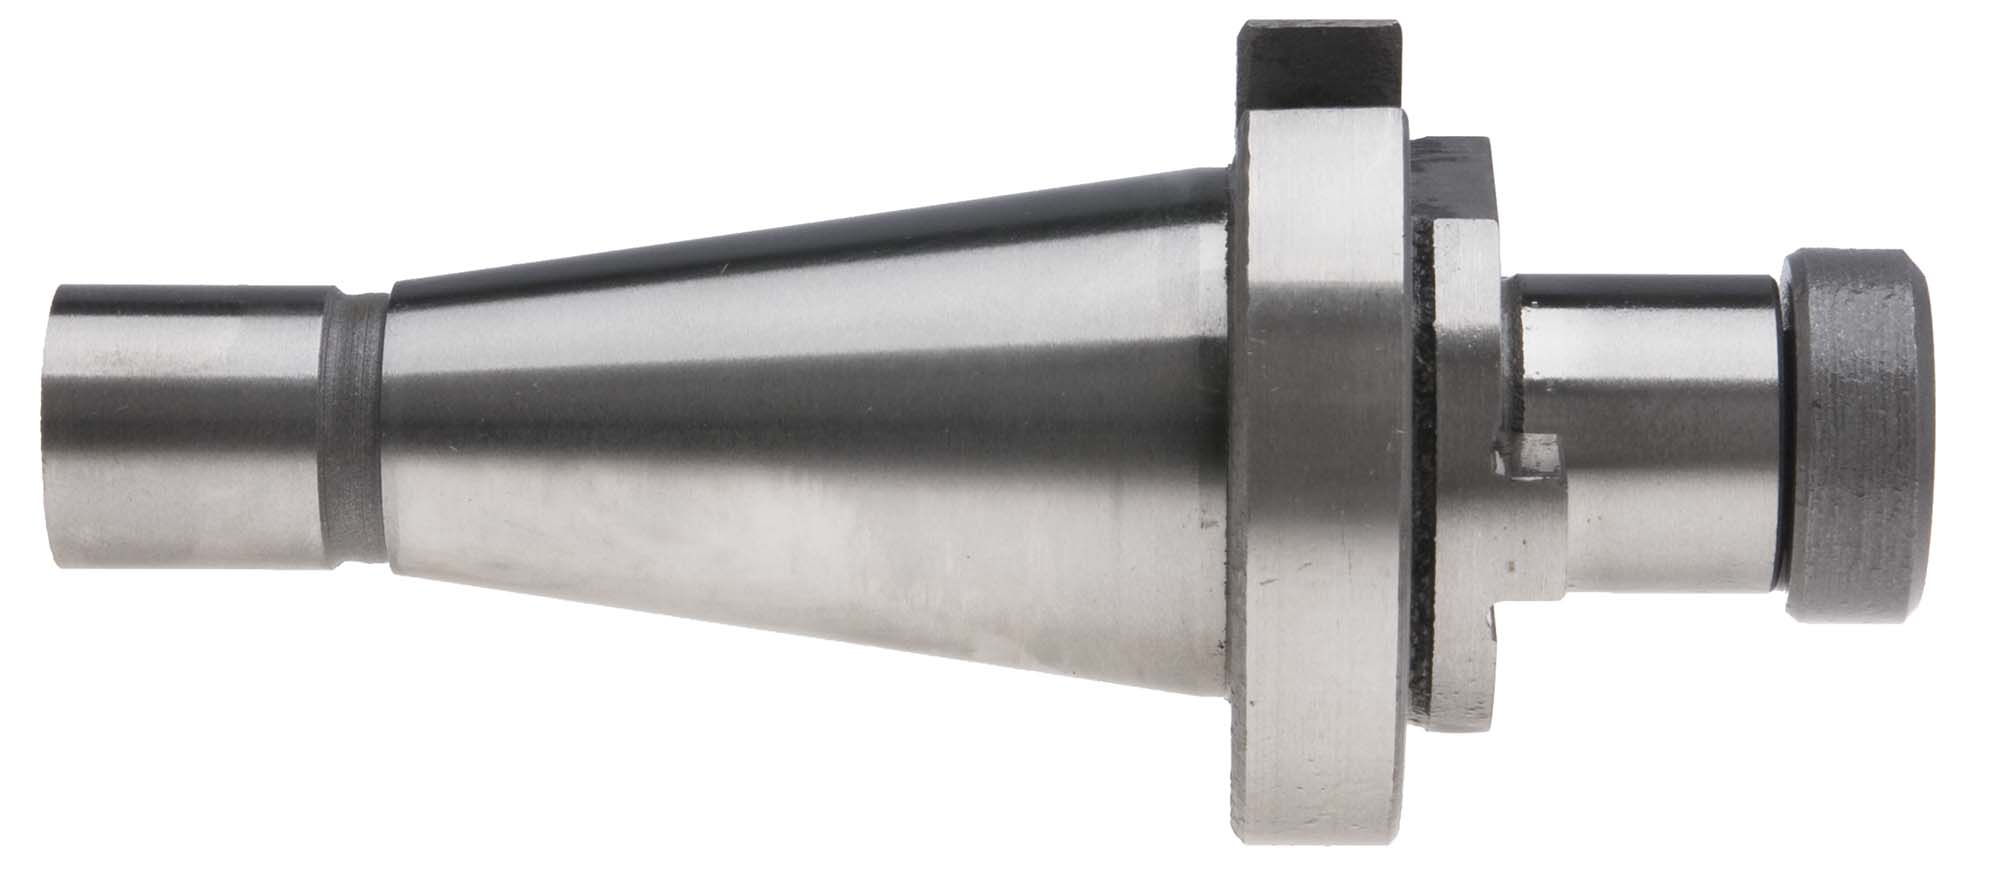 # 40 NST - 3/4 Shell End Mill Arbor